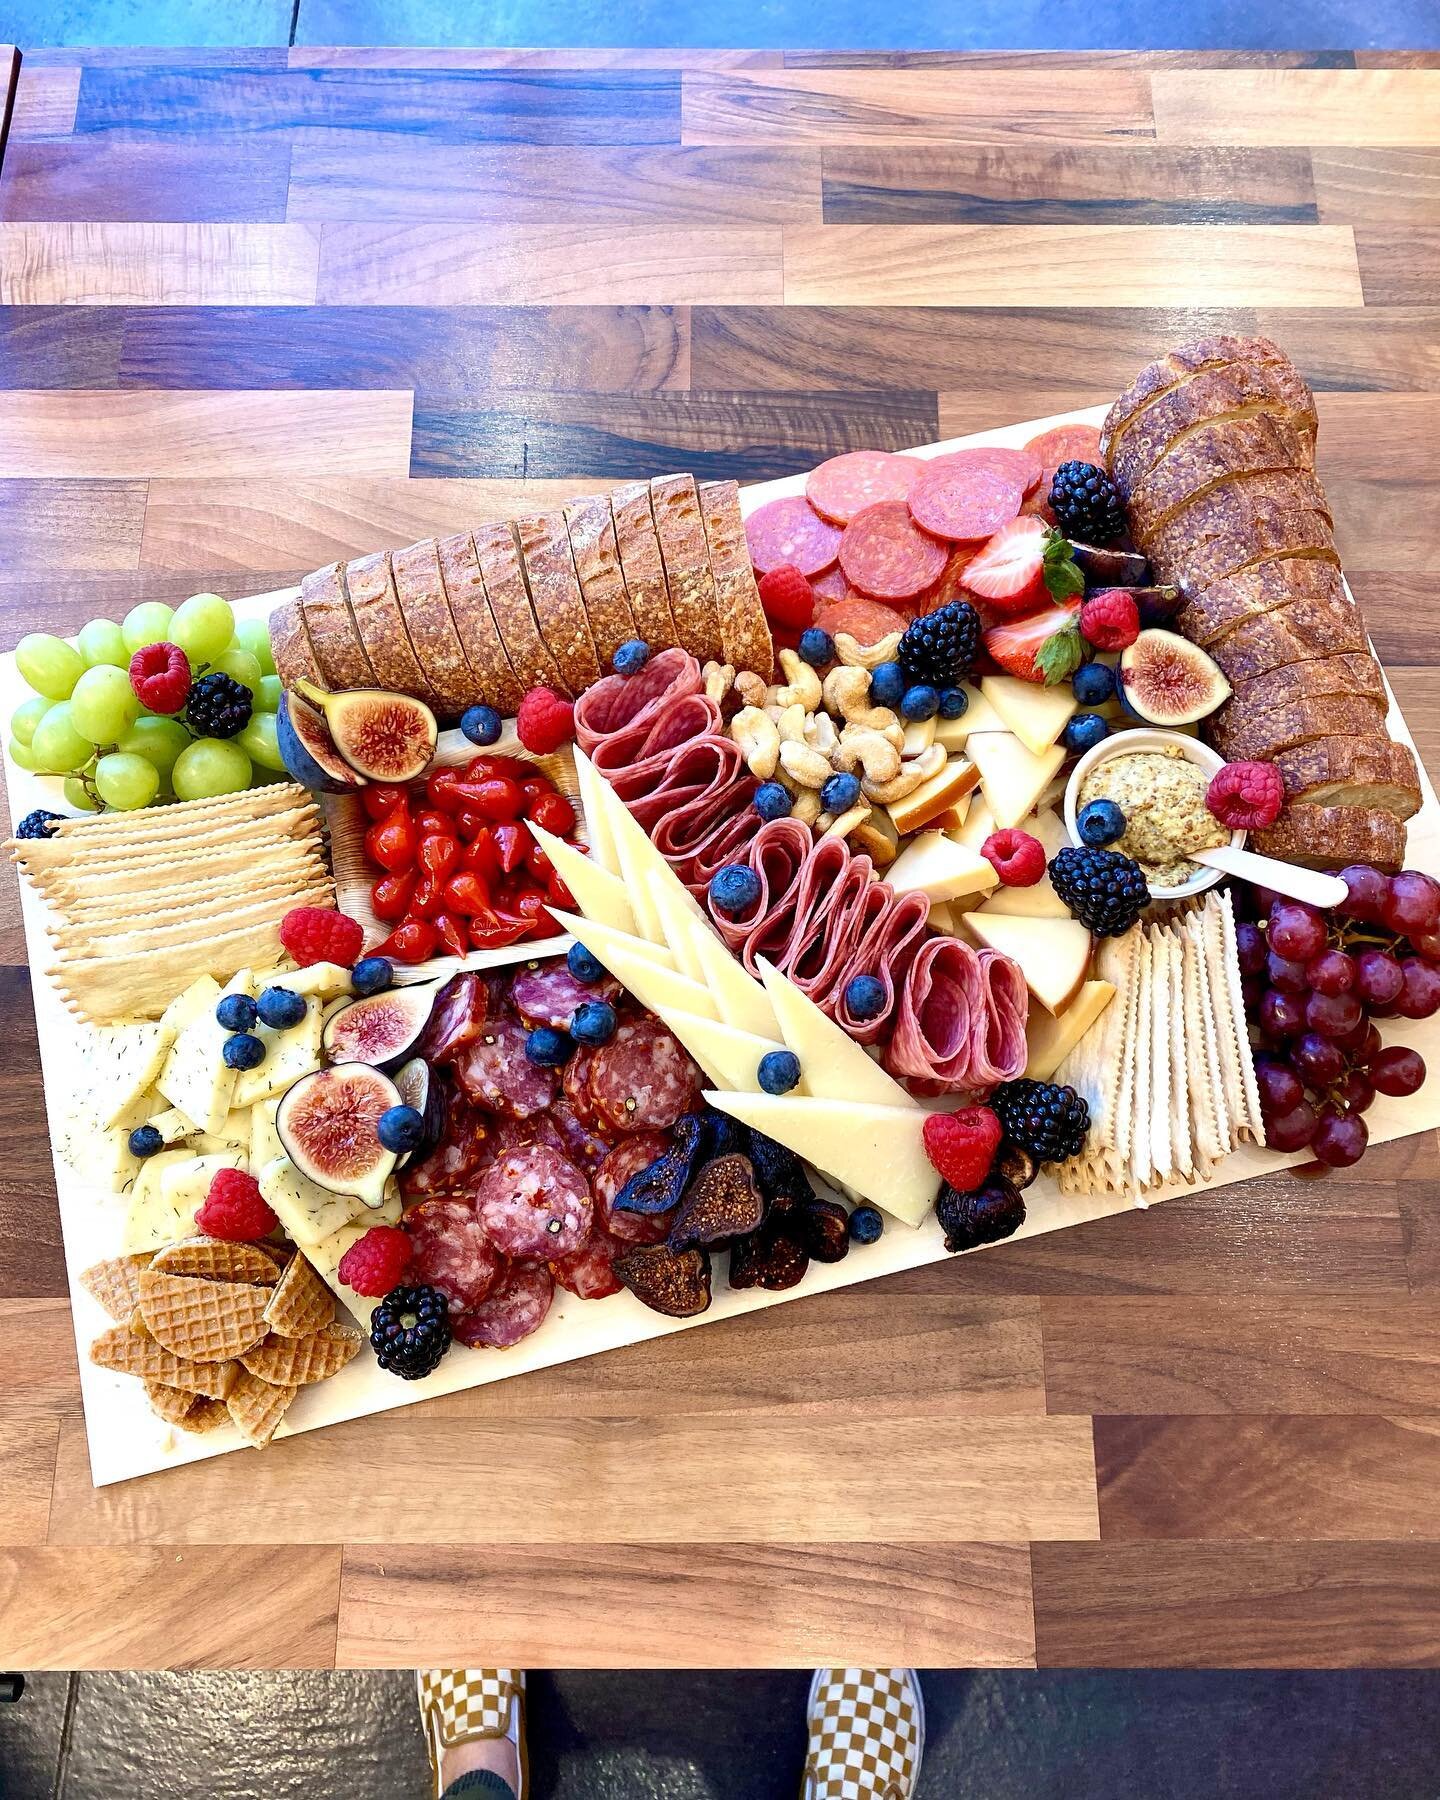 🔥 Some like it HOT! This blazing beauty has spicy mustard, red pepper salami, pepperoni, and Peruvian mini peppers 🌶 🔥
.
.
.
. 
#charcuterie #grazingboard # smallbusiness #supportlocal #denvercharcuterie #meatandcheese #charcuterieboard #womanowne